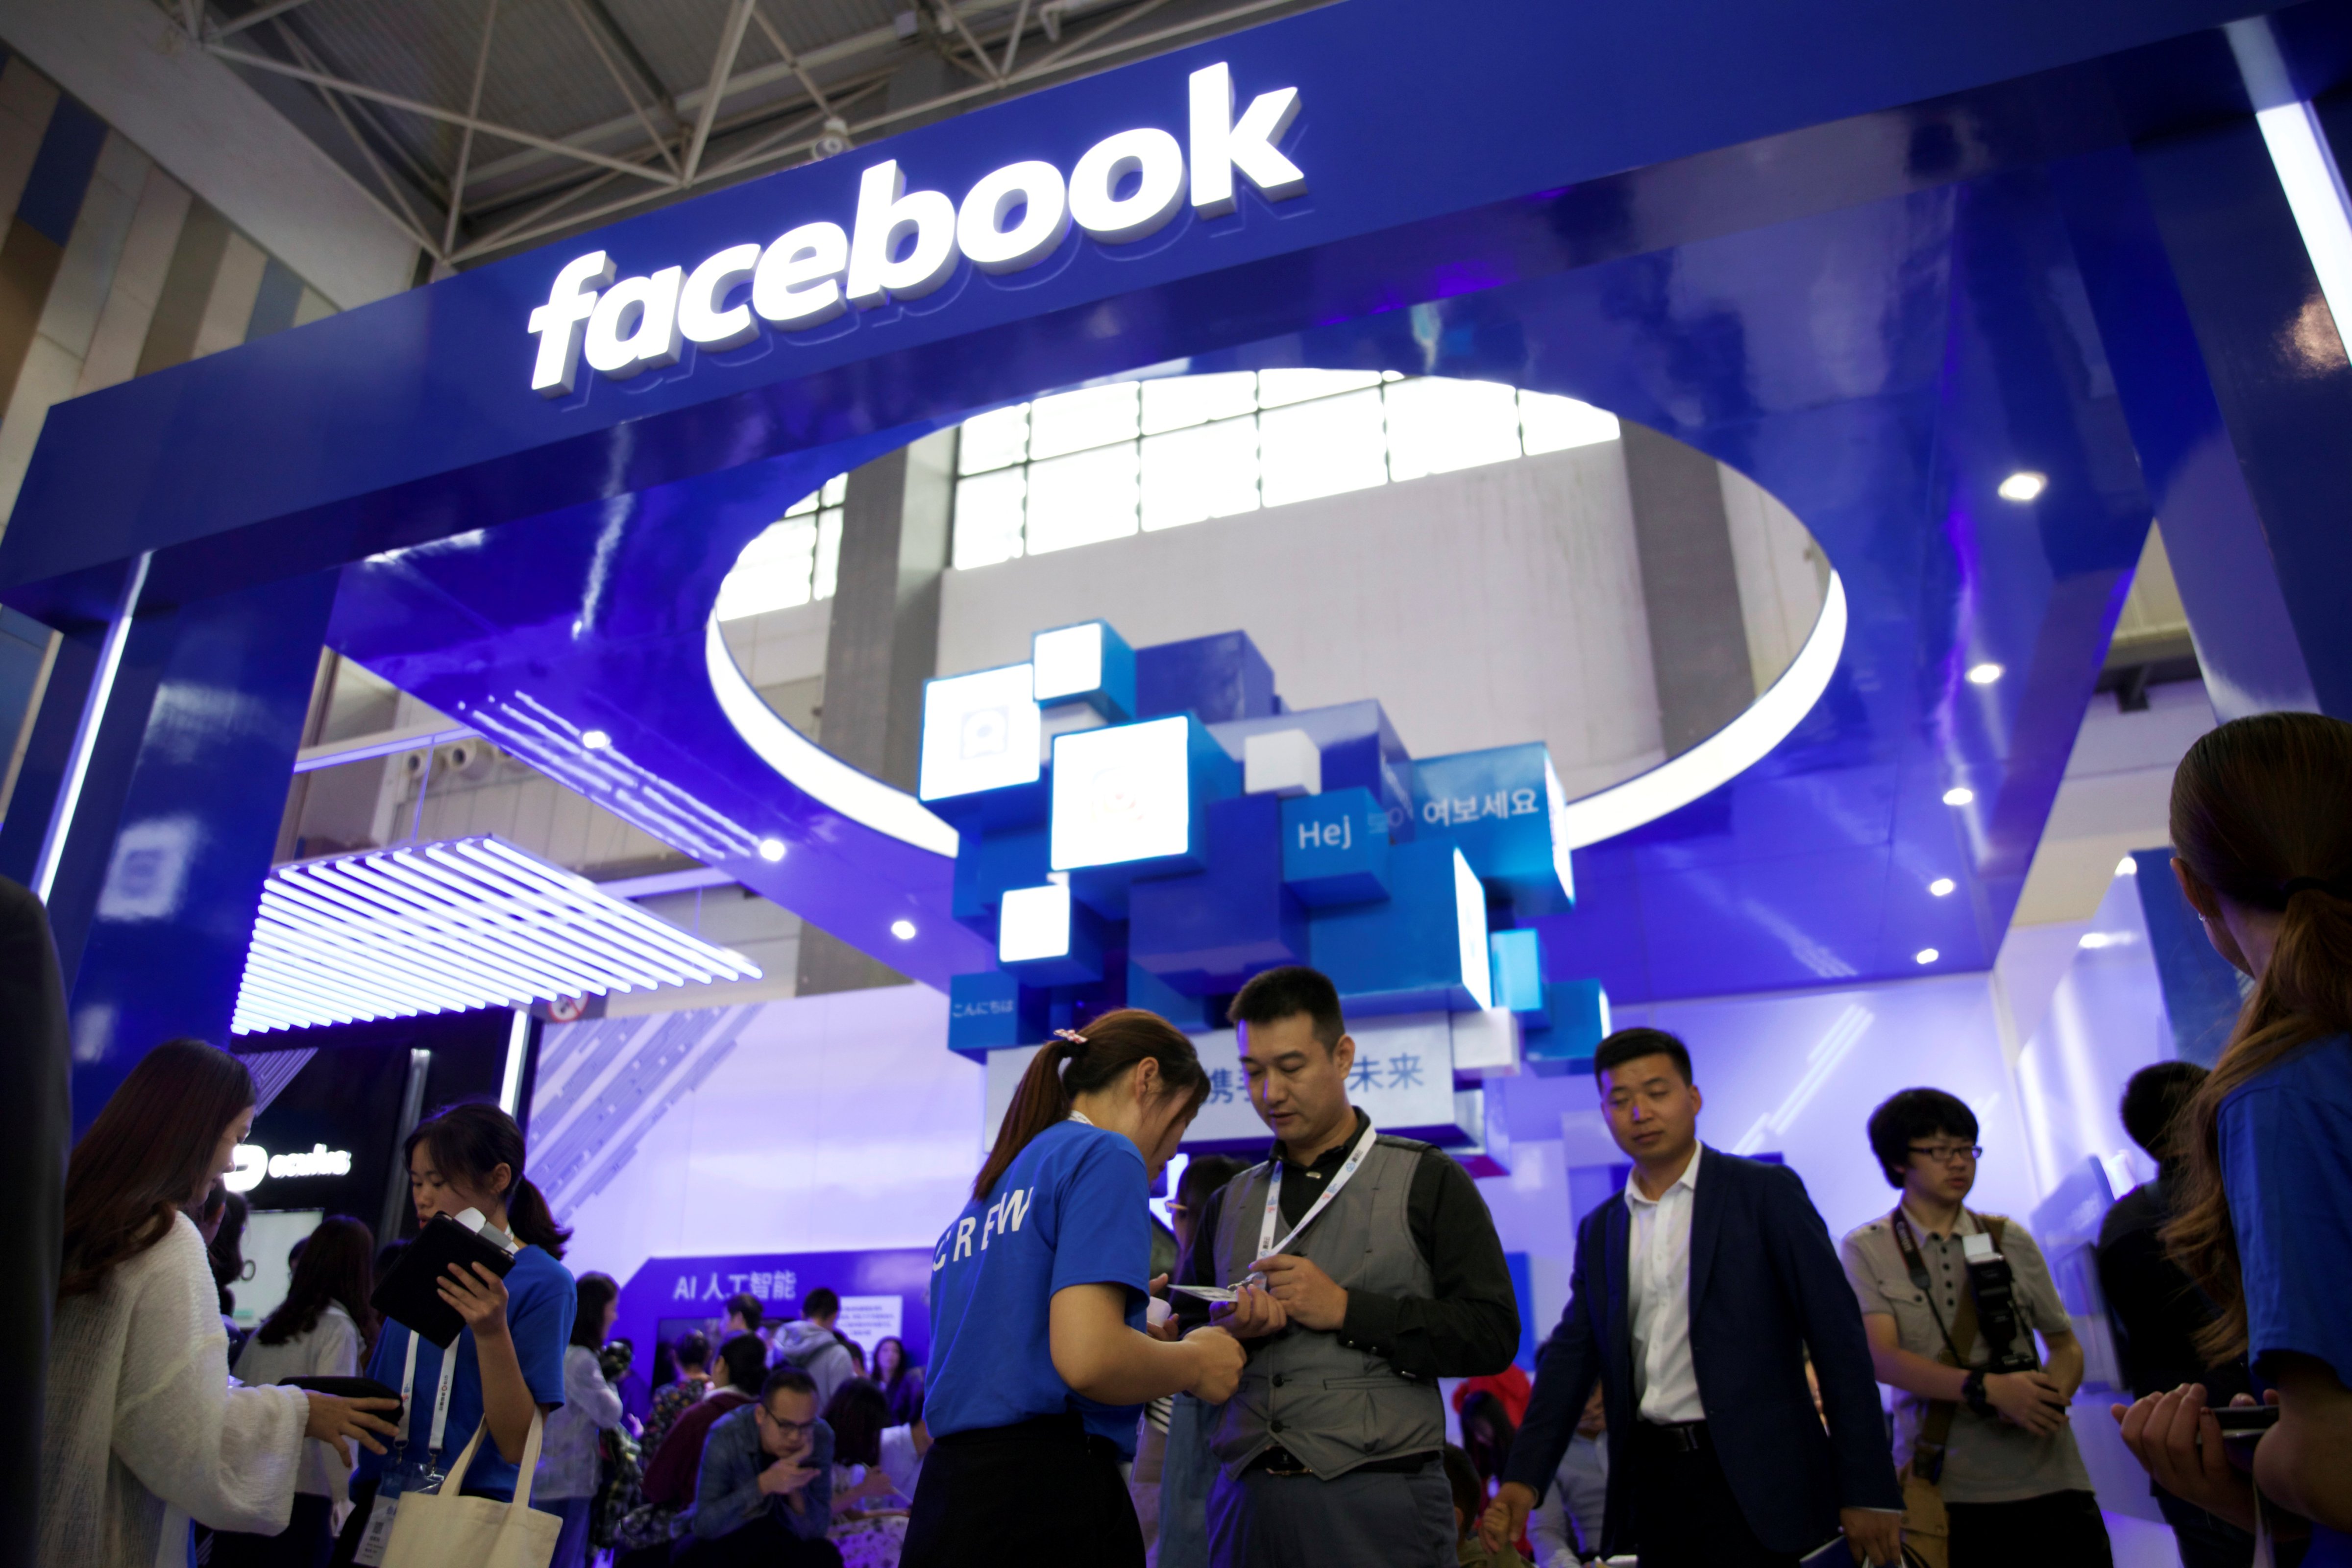 Facebook booth is seen at the China International Big Data Industry Expo in Guiyang